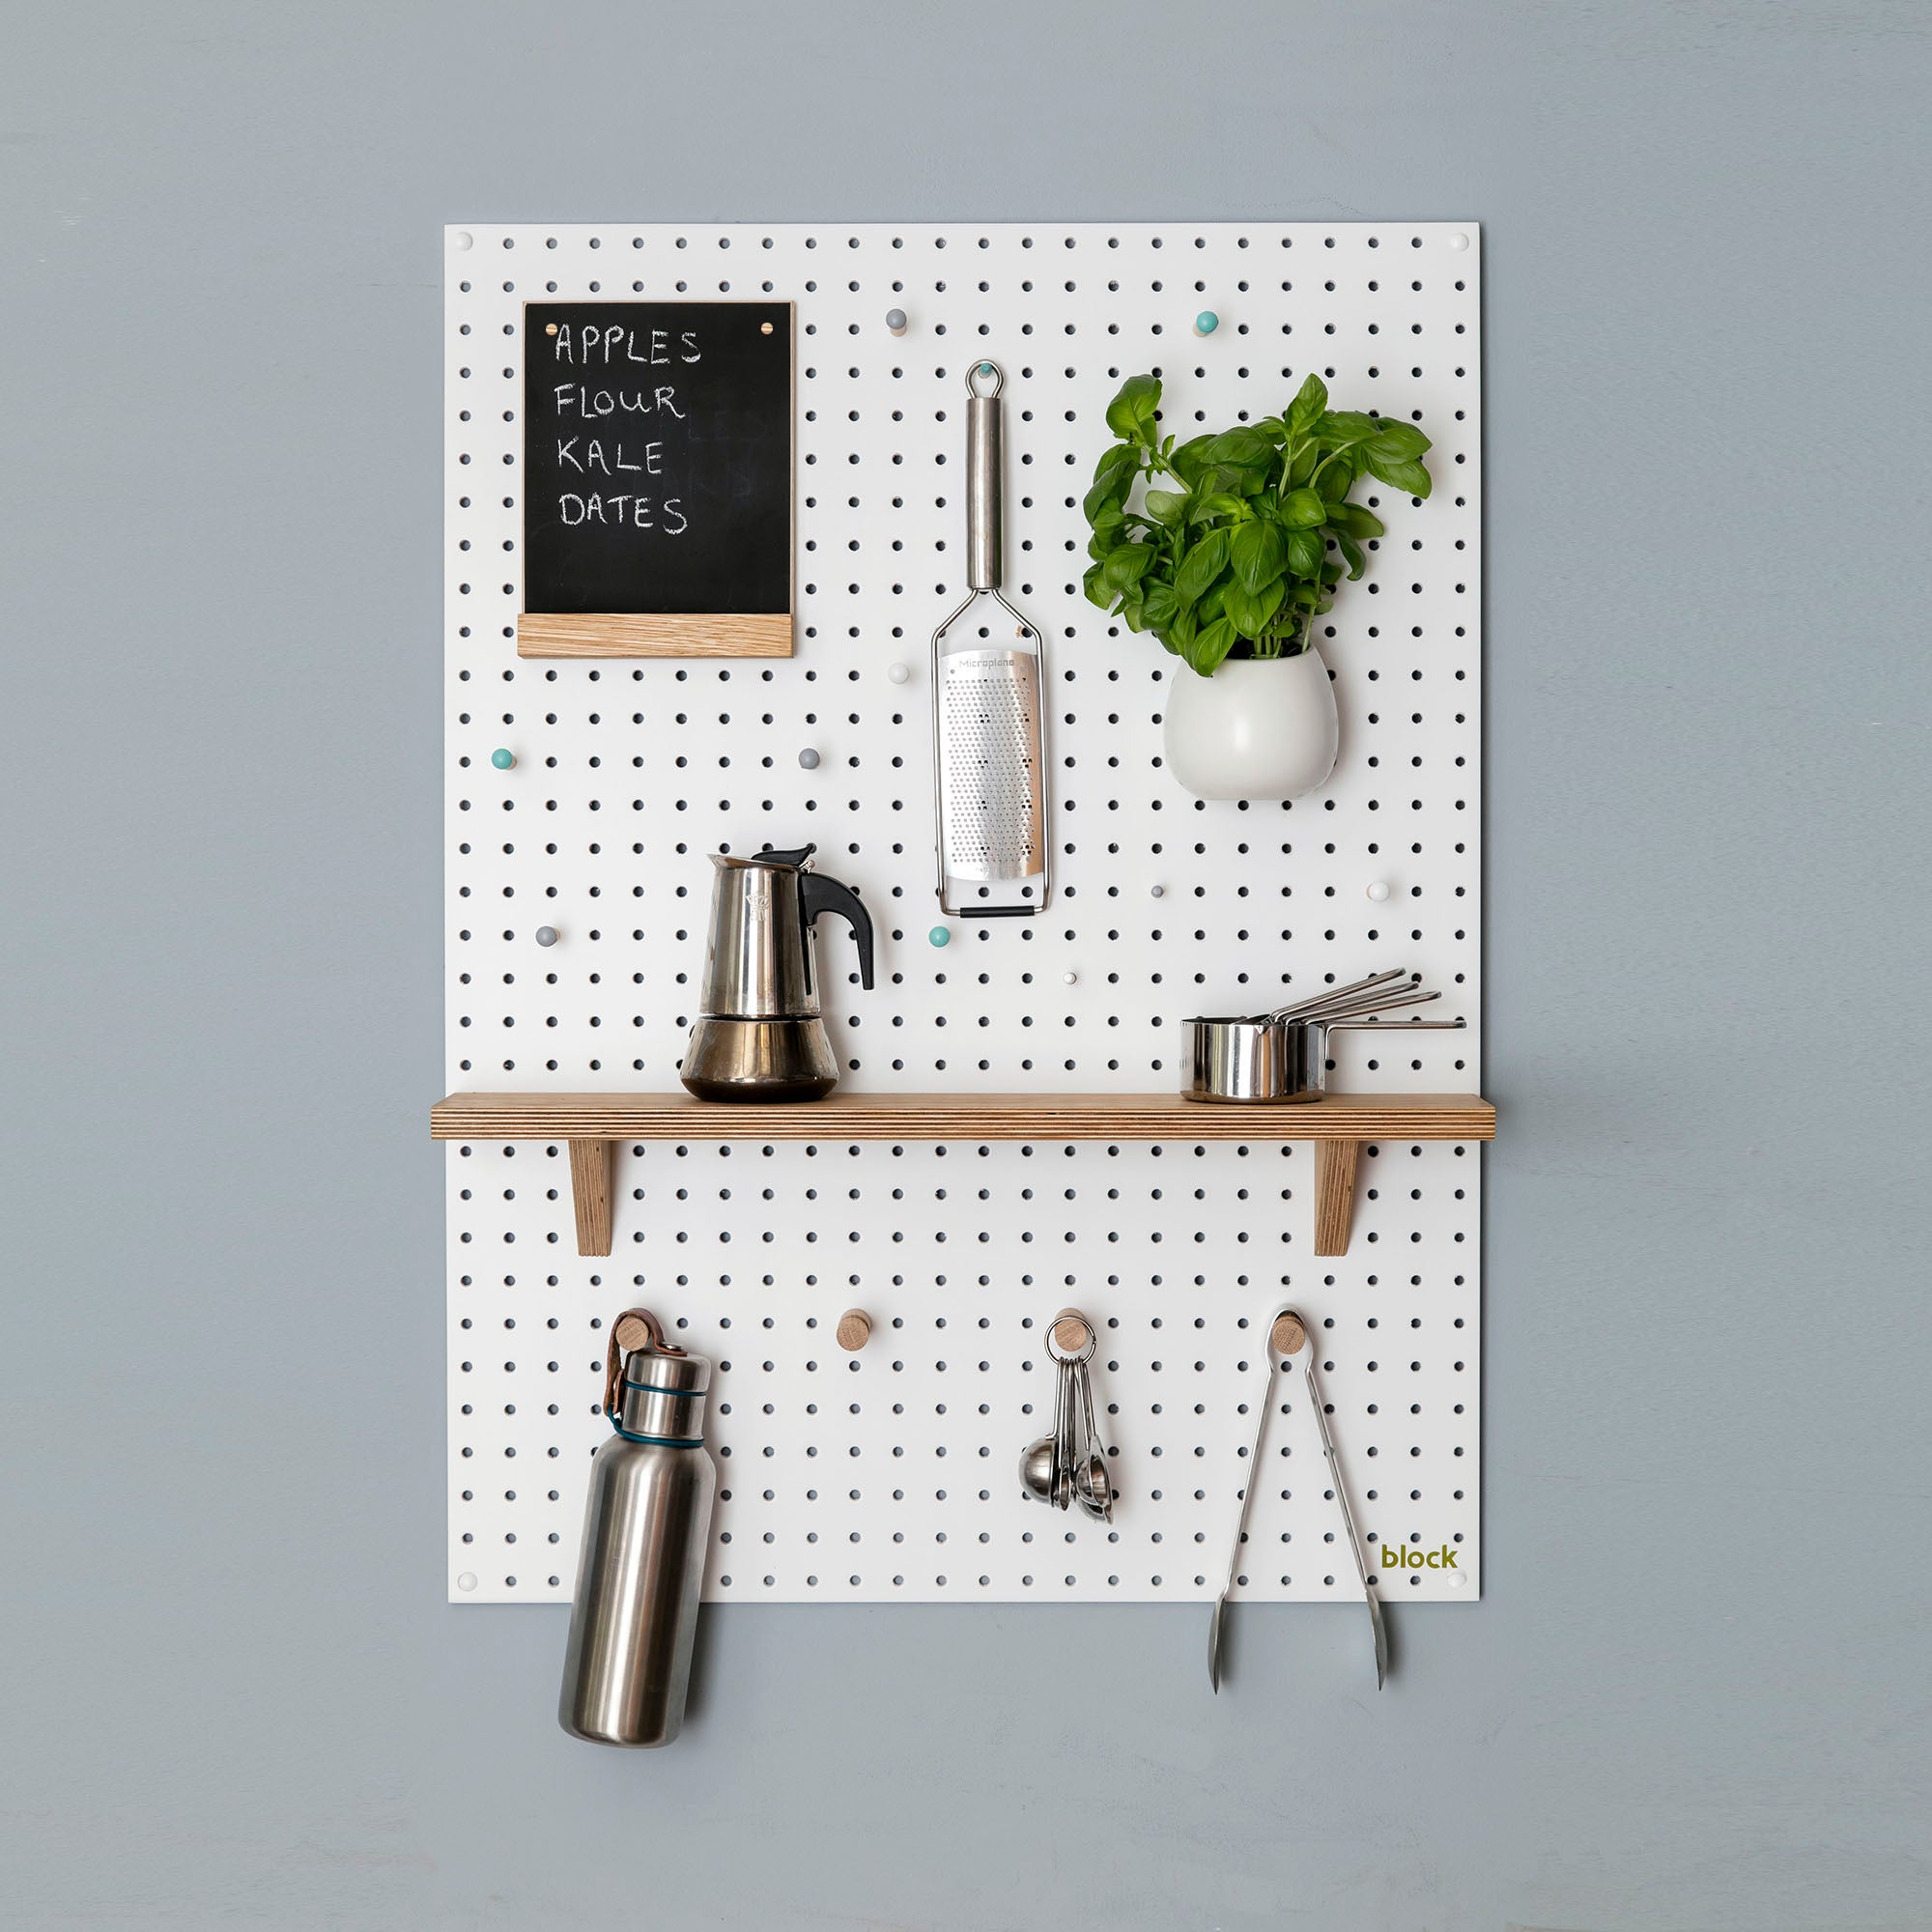 Large white pegboard for kitchen wall storage